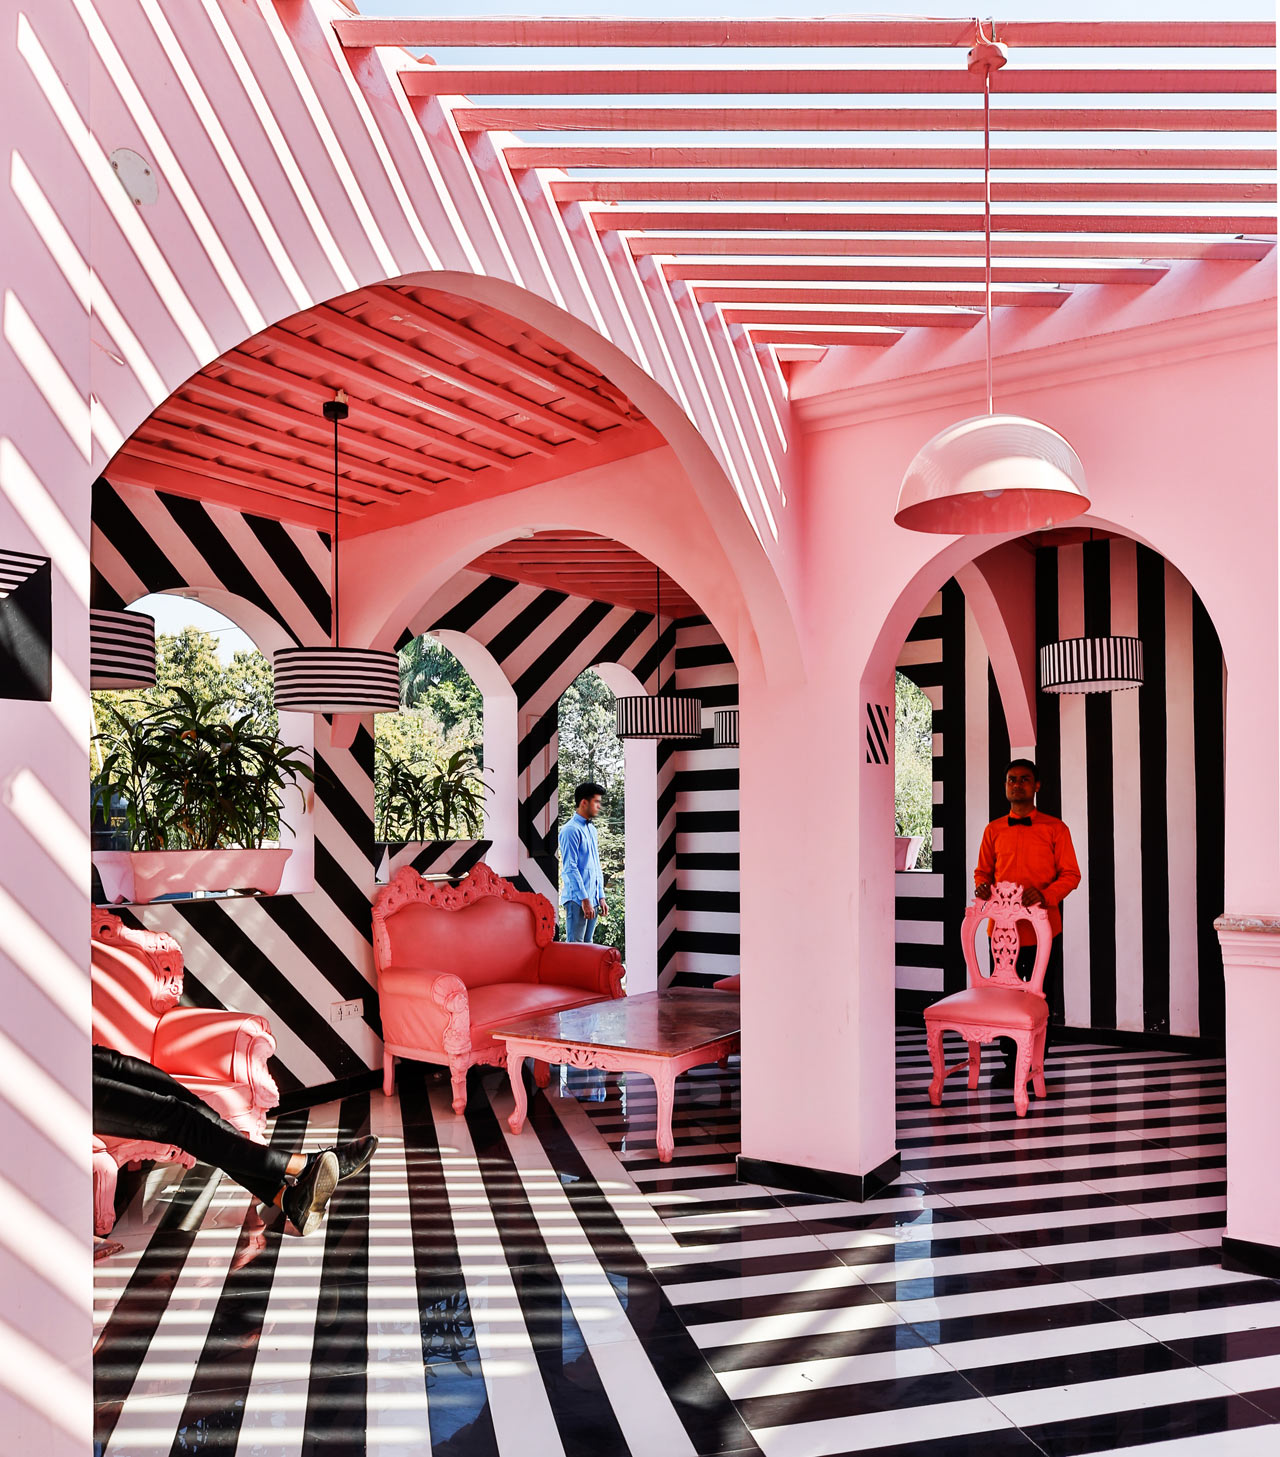 The Pink Zebra: An Eye-Popping Restaurant/Bar Inspired by the Work of Wes  Anderson